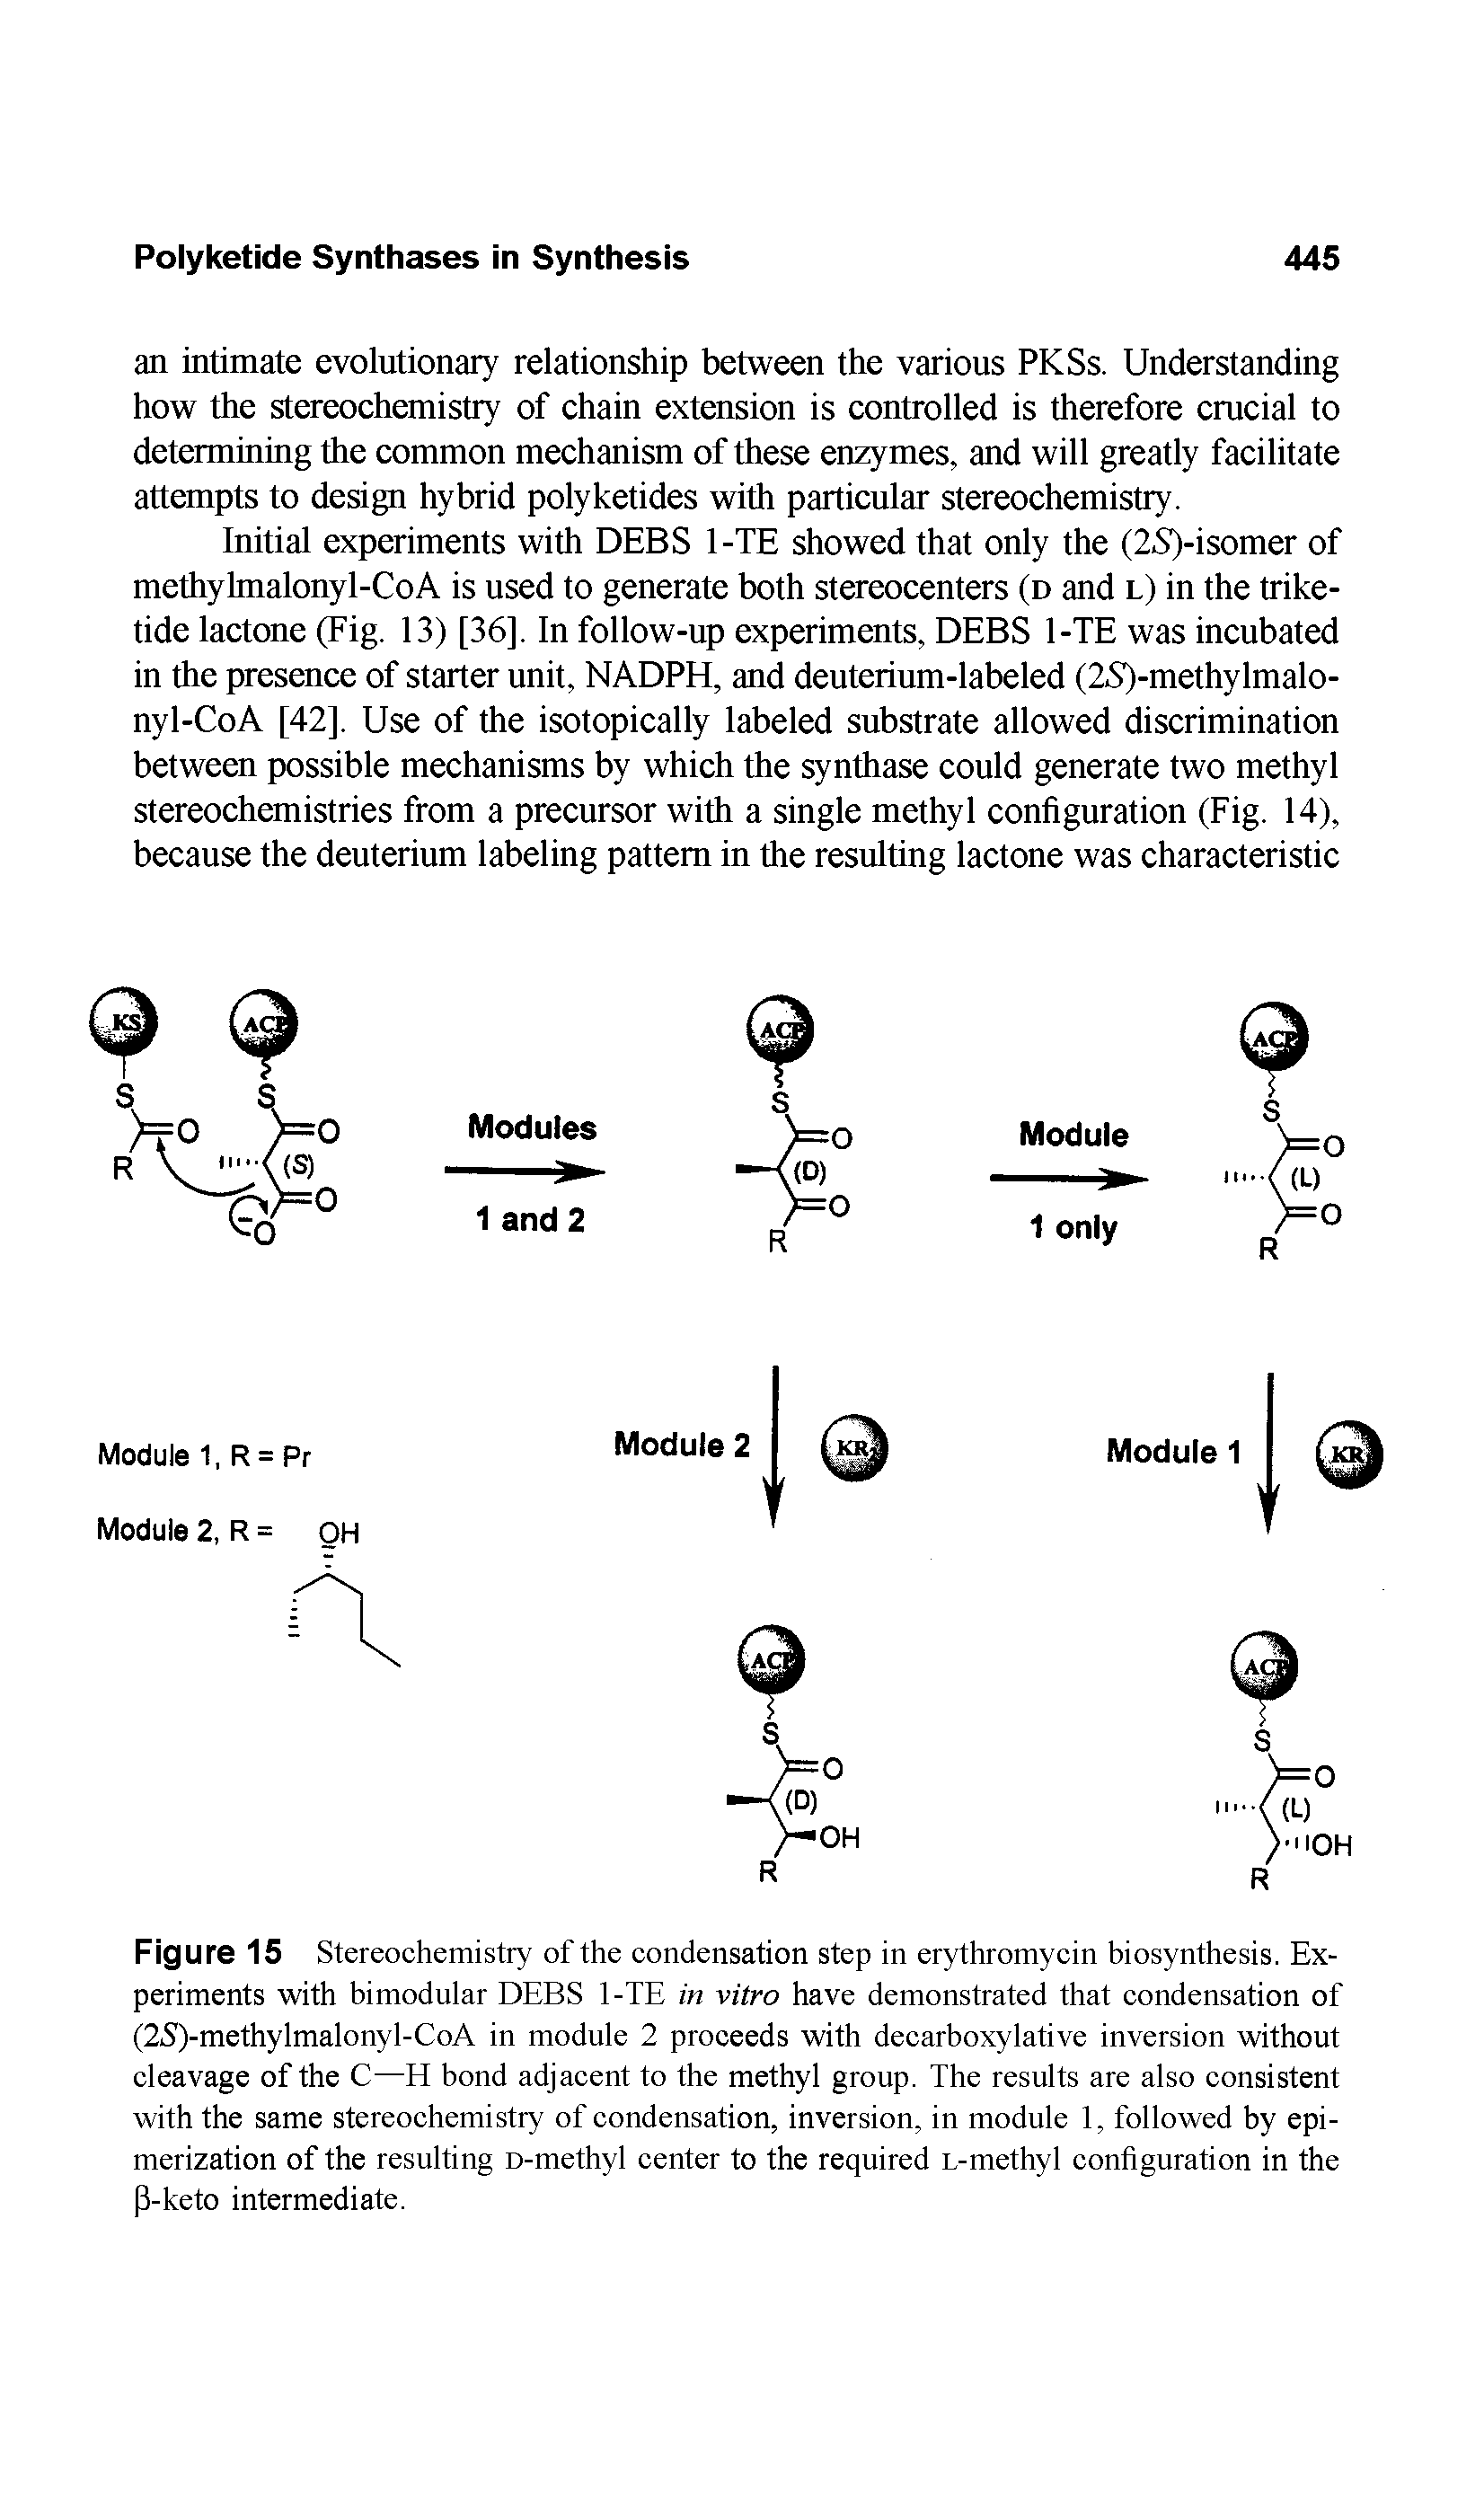 Figure 15 Stereochemistry of the condensation step in erythromycin biosynthesis. Experiments with bimodular DEBS 1-TE in vitro have demonstrated that condensation of (2S)-methylmalonyl-CoA in module 2 proceeds with decarboxylative inversion without cleavage of the C—H bond adjacent to the methyl group. The results are also consistent with the same stereochemistry of condensation, inversion, in module 1, followed by epi-merization of the resulting D-methyl center to the required L-methyl configuration in the P-keto intermediate.